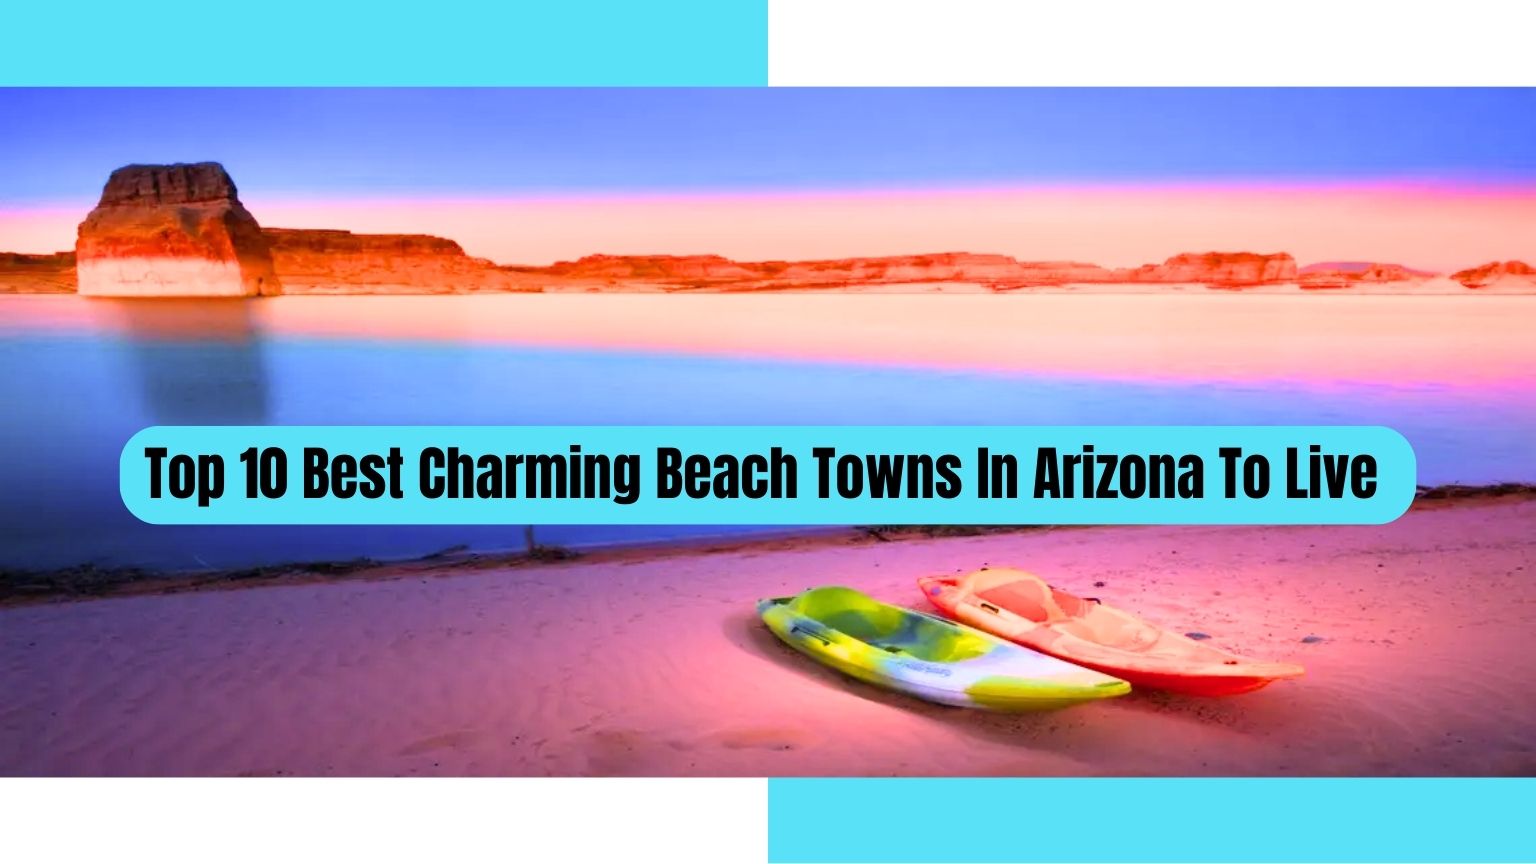 Top 10 Best Charming Beach Towns In Arizona To Live , Best Charming Beach Towns In Arizona To Live, Best charming beach towns in arizona, charming beach towns in arizona, beach towns in arizona,